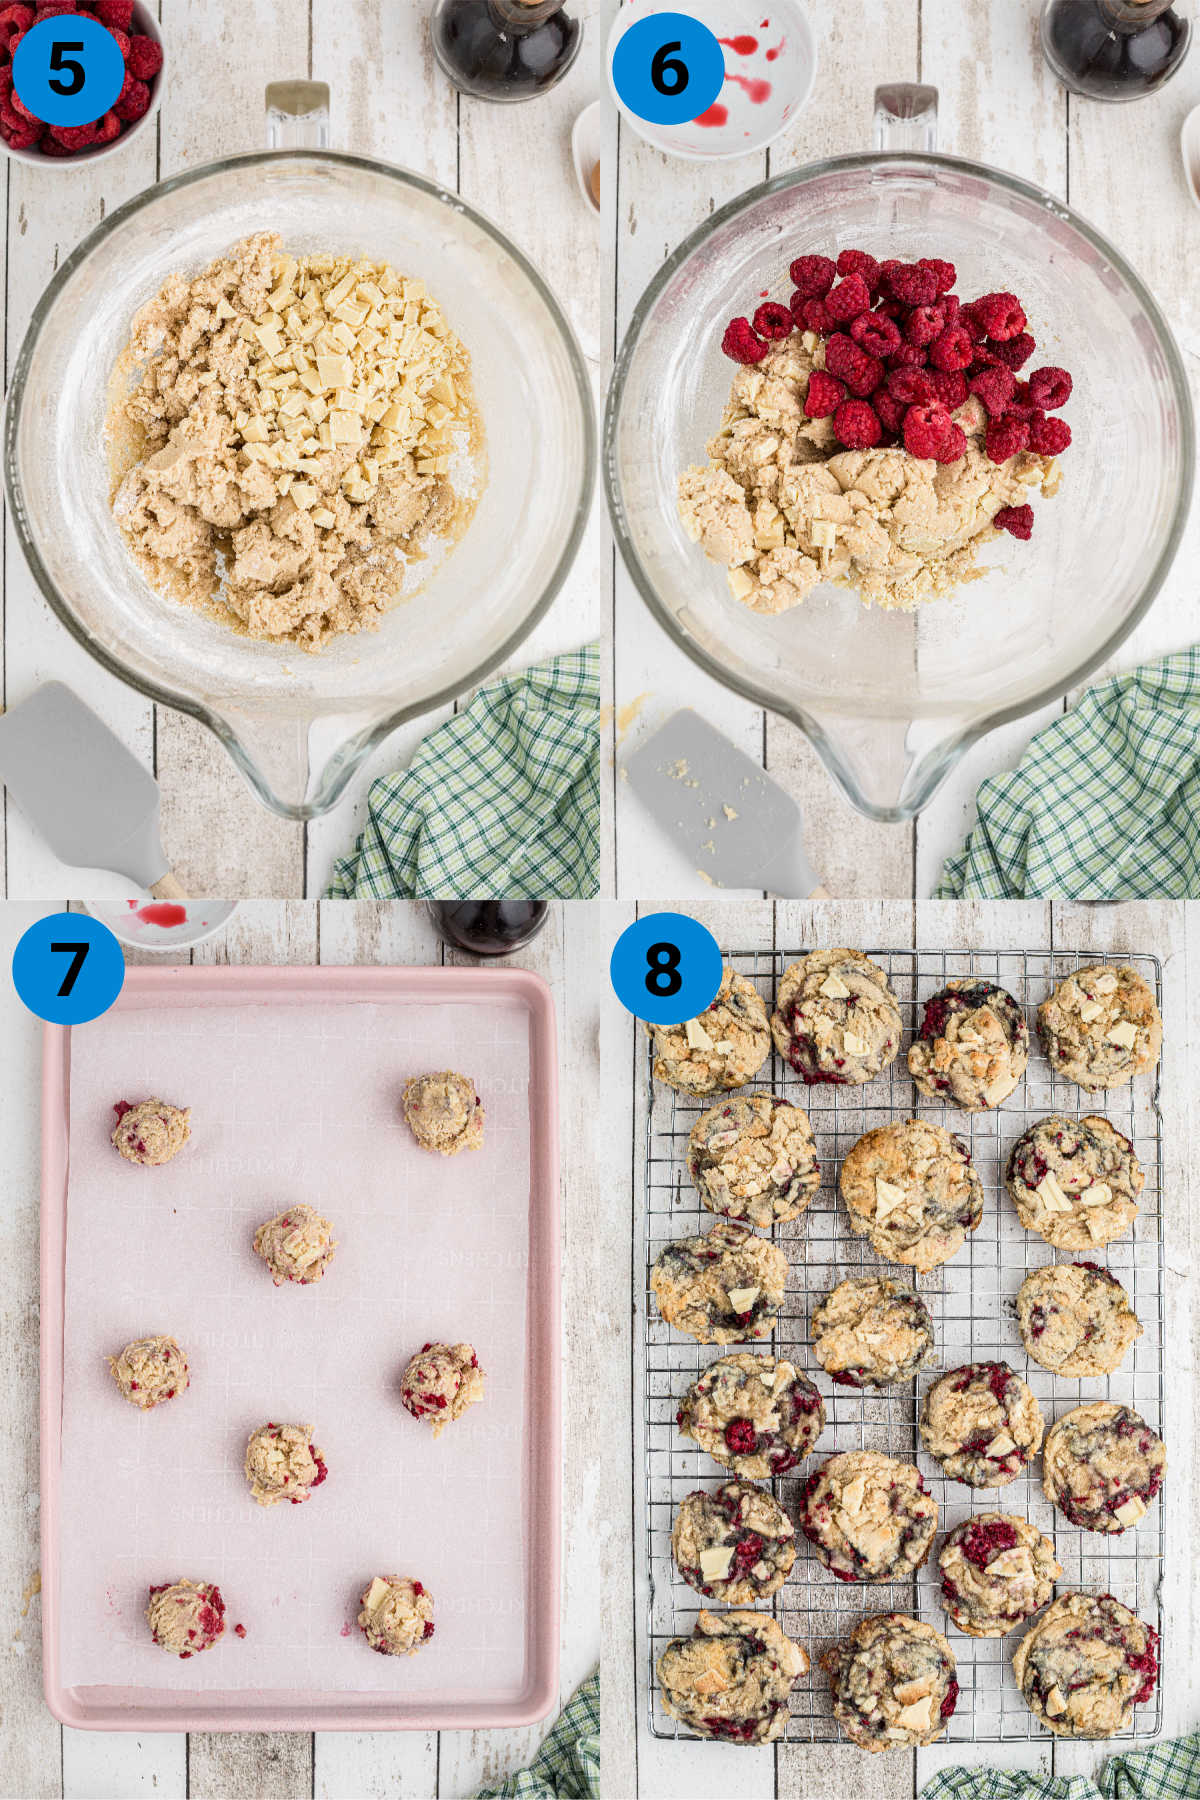 A collage of four images showing how to make white chocolate raspberry cookies - this is recipe steps 5-8.